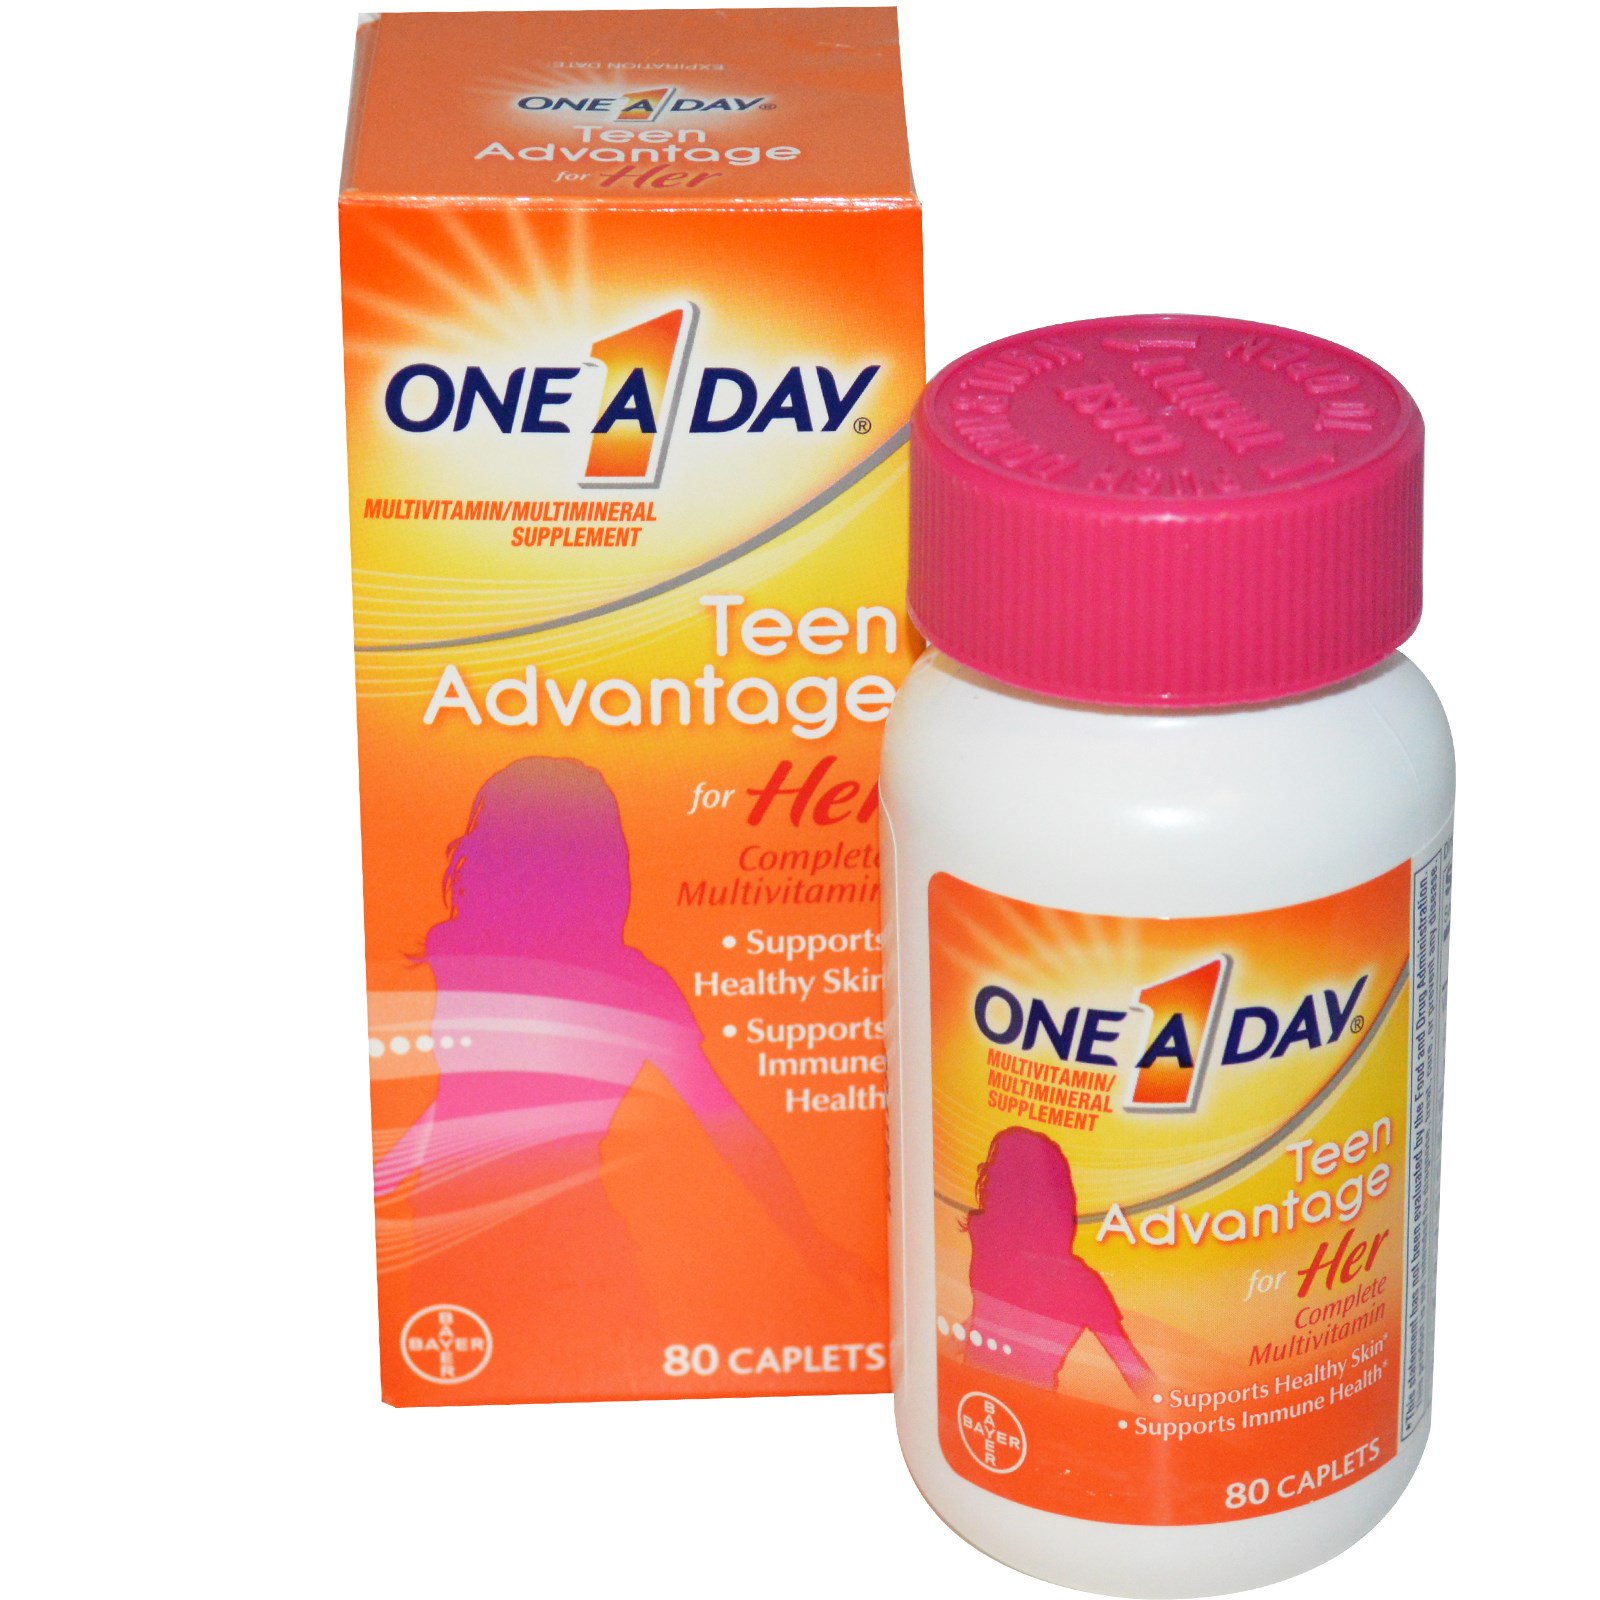 One-A-Day, Teen Advantage, for Her, Multivitamin ...